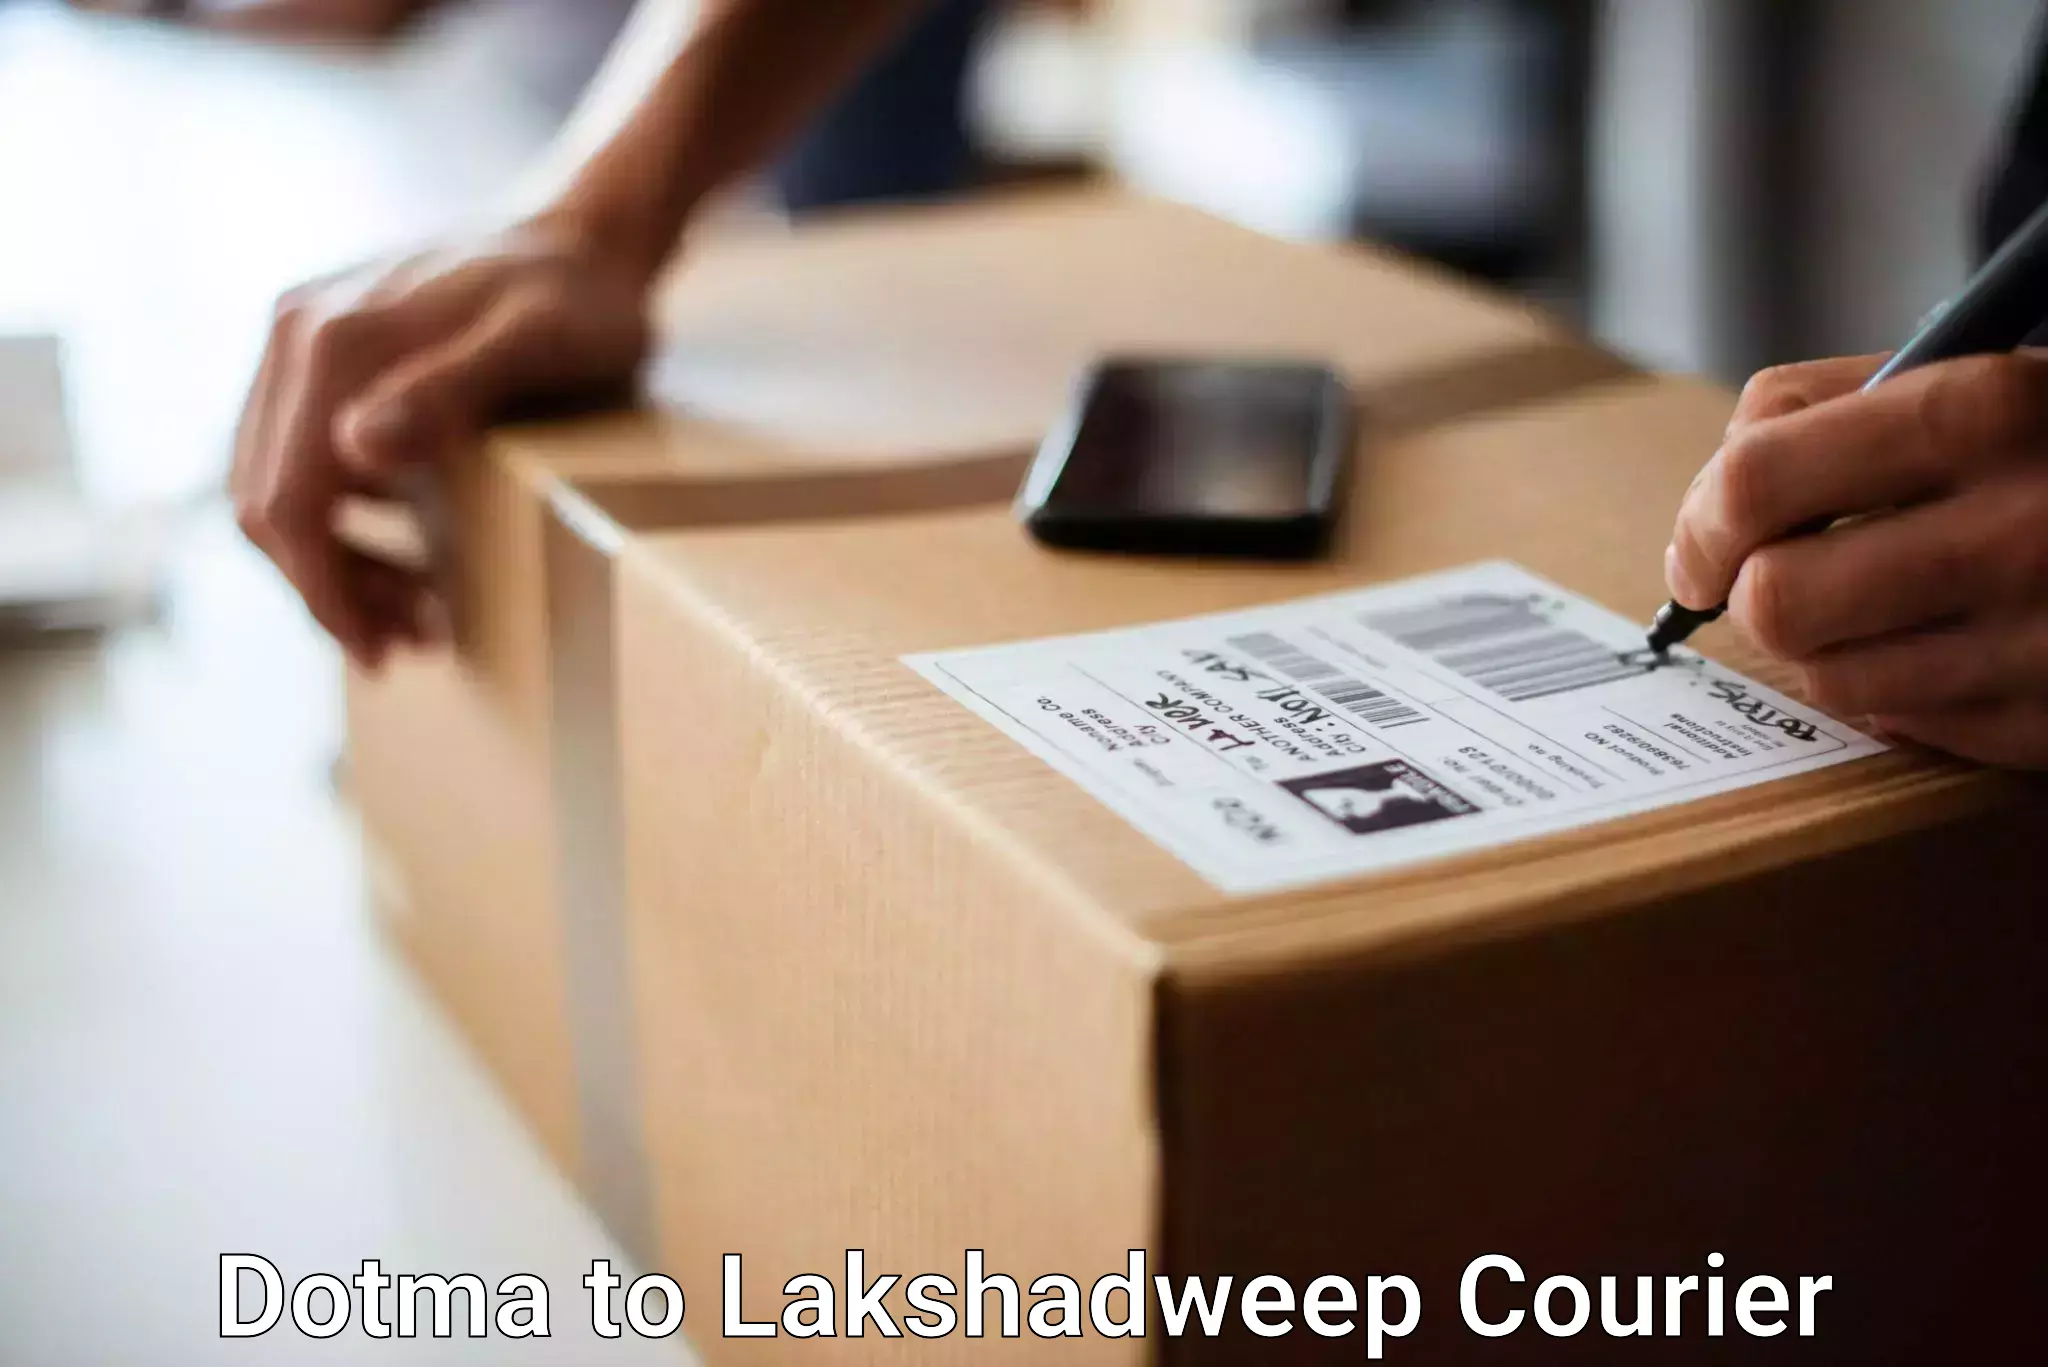 Baggage transport innovation in Dotma to Lakshadweep